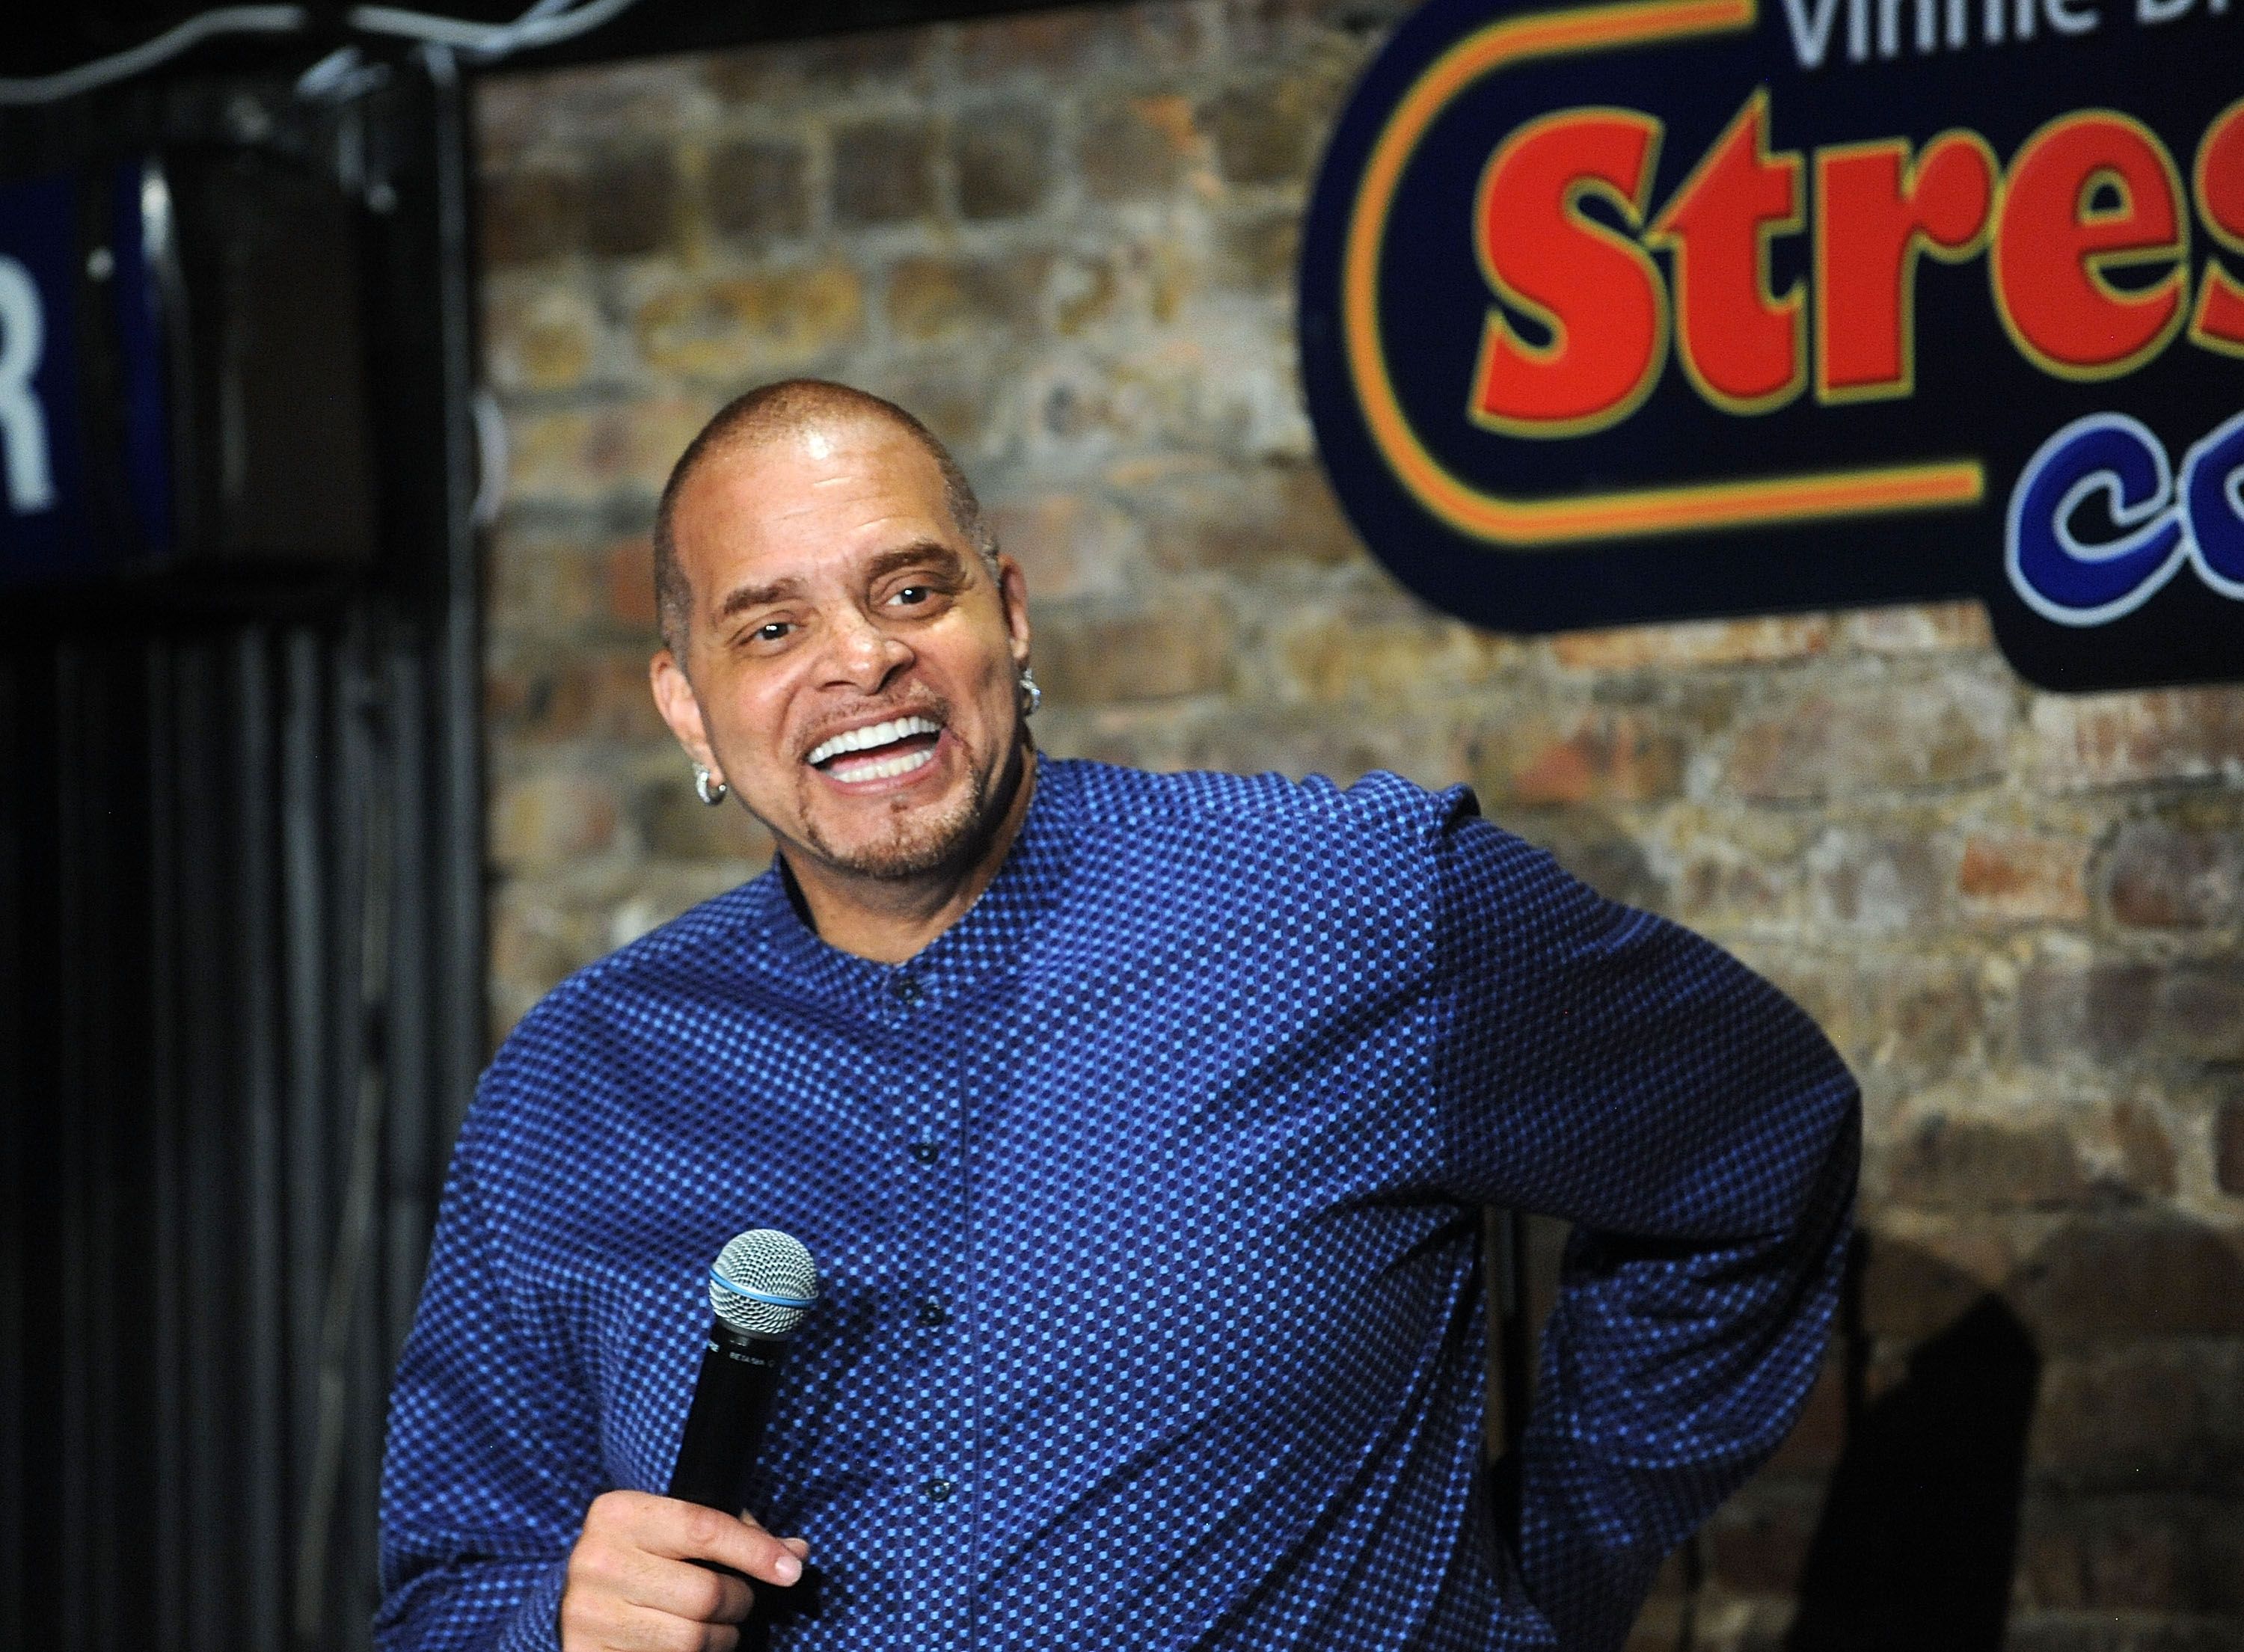 Sinbad performs at the Stress Factory Comedy Club on June 30, 2017. | Photo: Getty Images